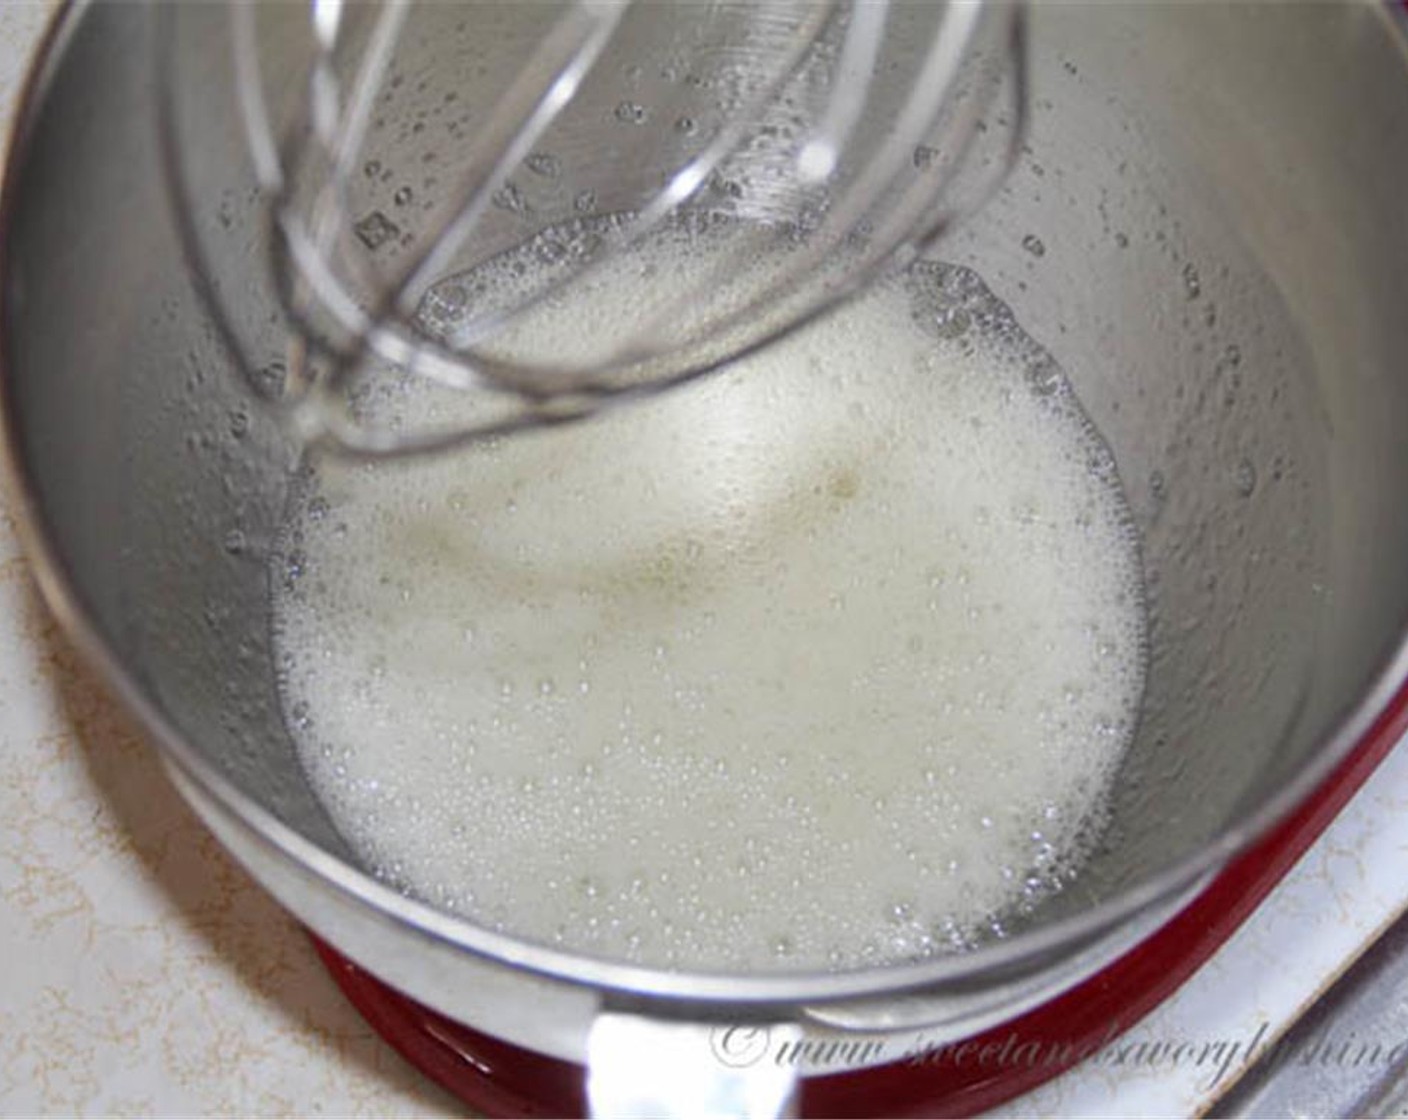 step 5 In a large mixing bowl, beat the egg white until foamy on a low speed. Add Cream of Tartar (1 tsp) and Salt (1/2 tsp) and continue to beat, gradually increasing the speed to high.